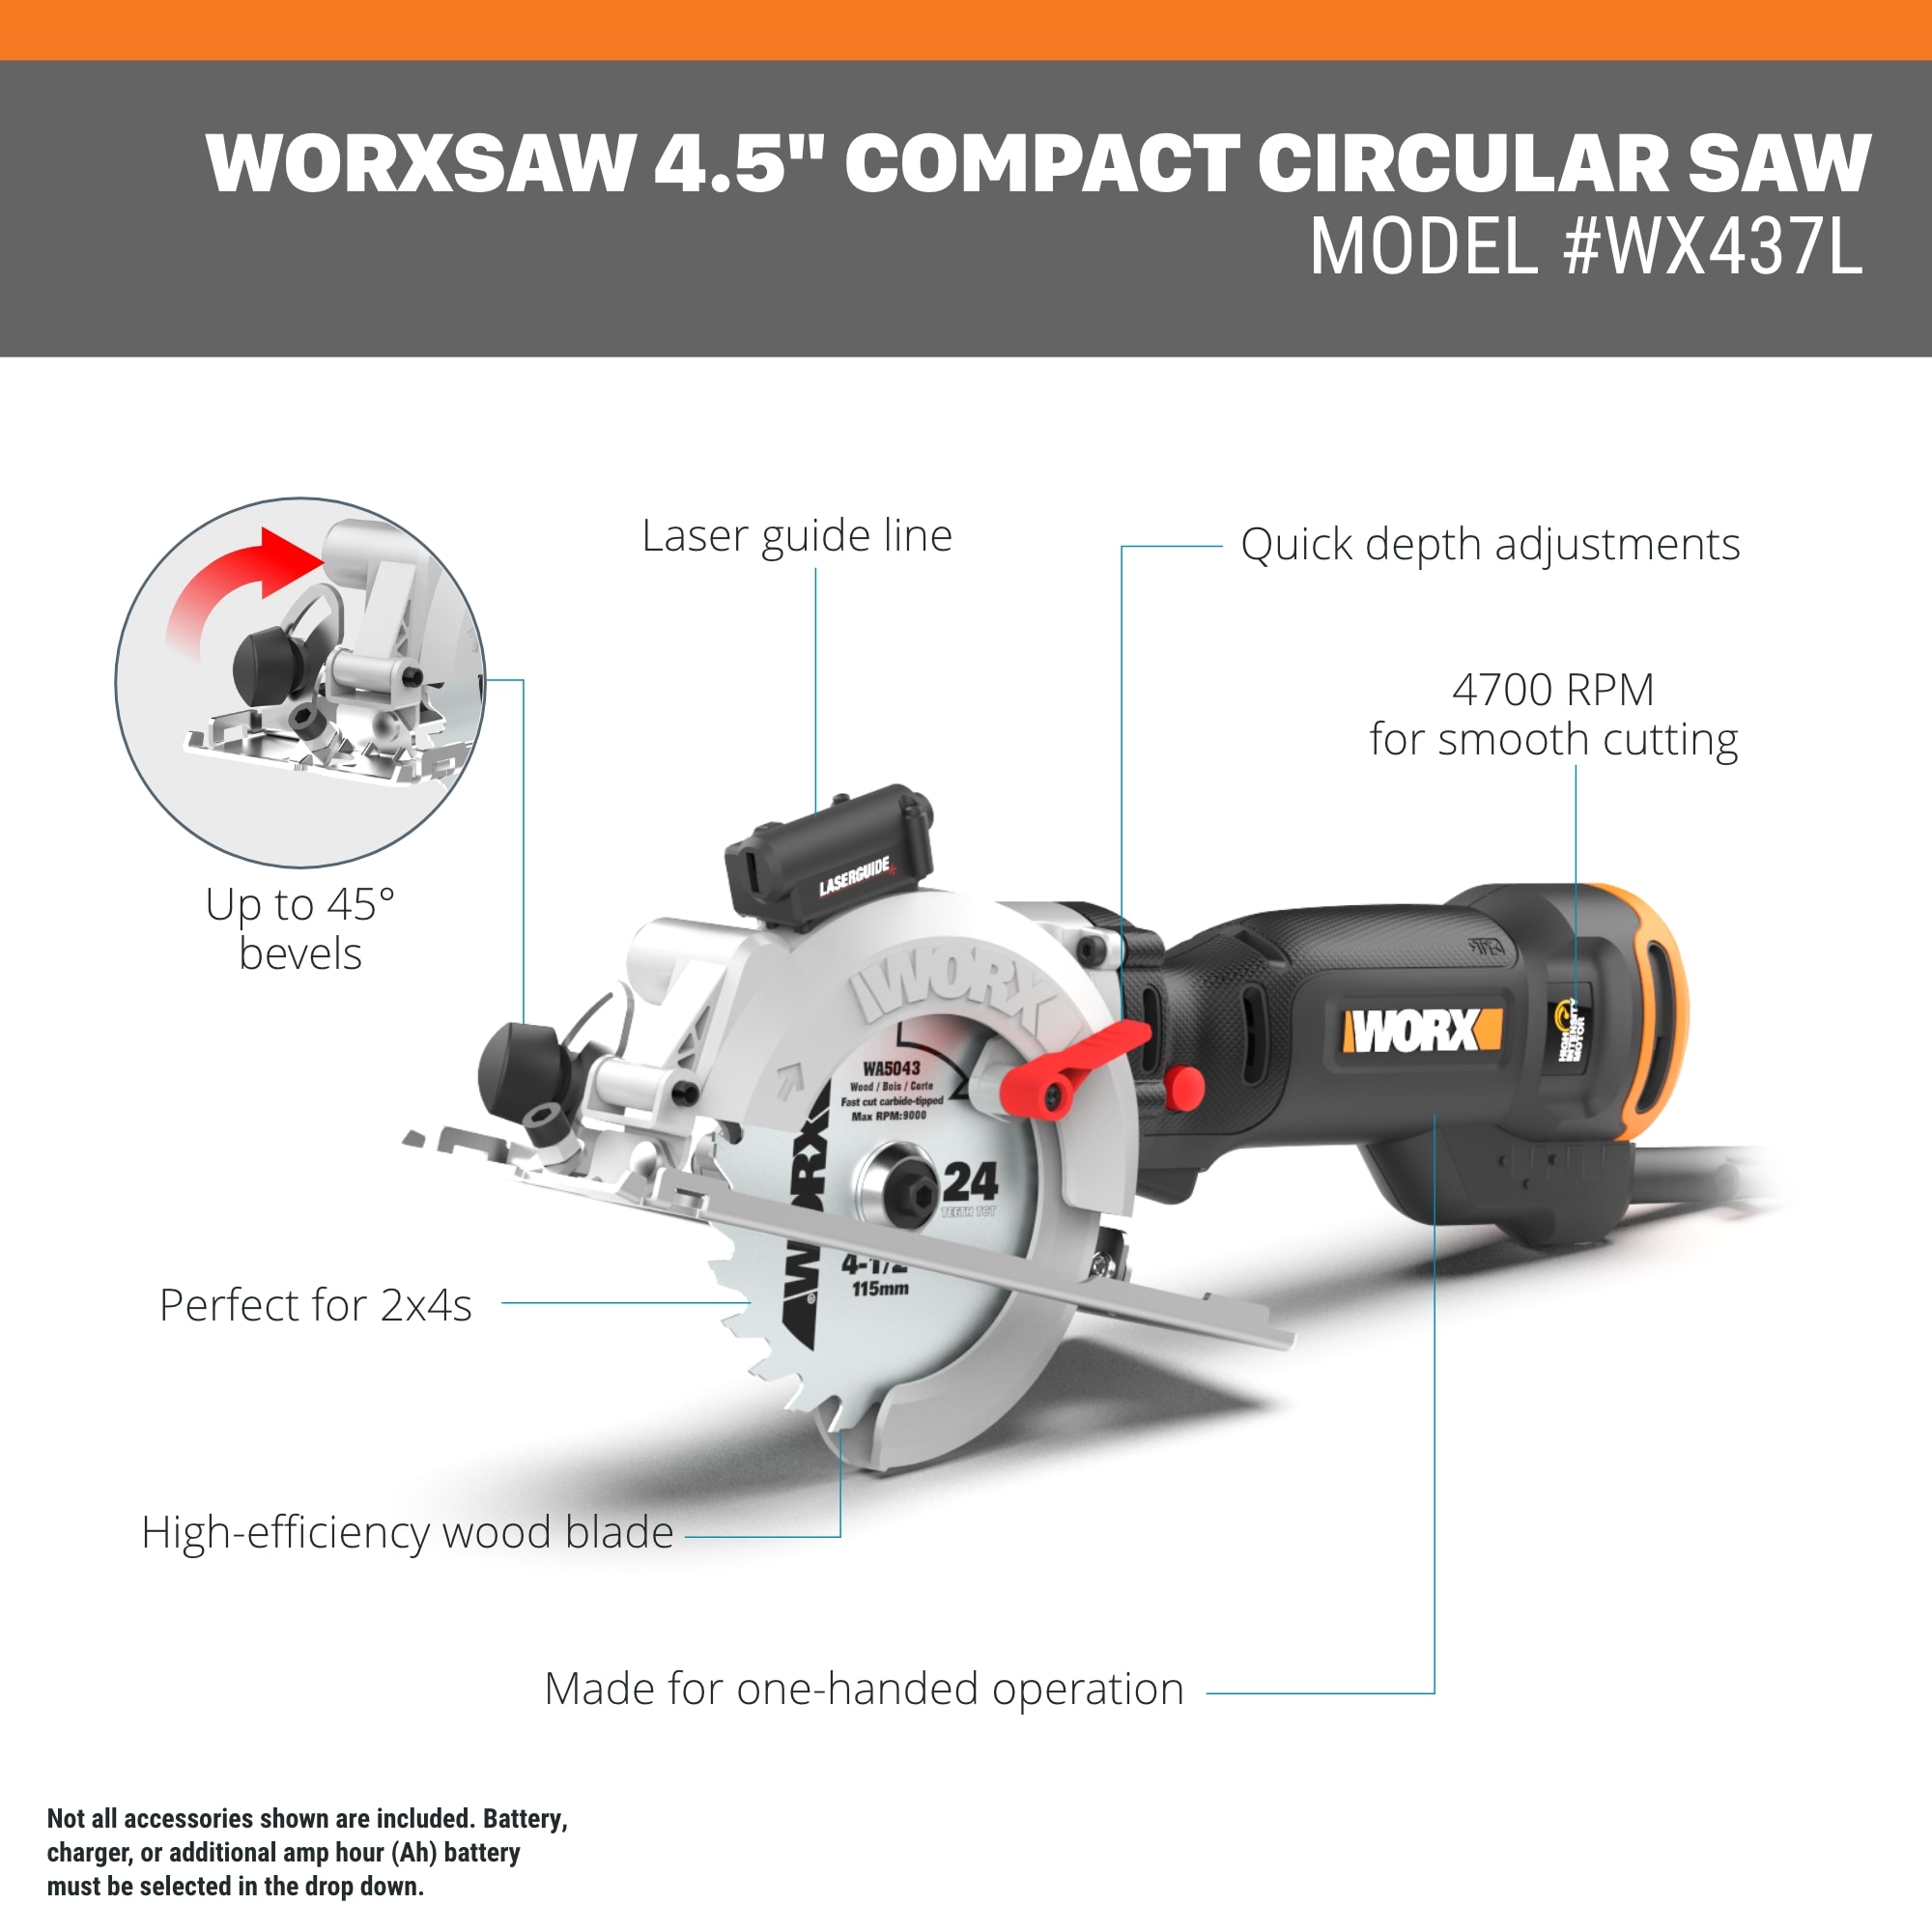 Pack Of 4 Assorted Metal/Wood 4-1/2-Inch 4.5-Inch Circular Saw